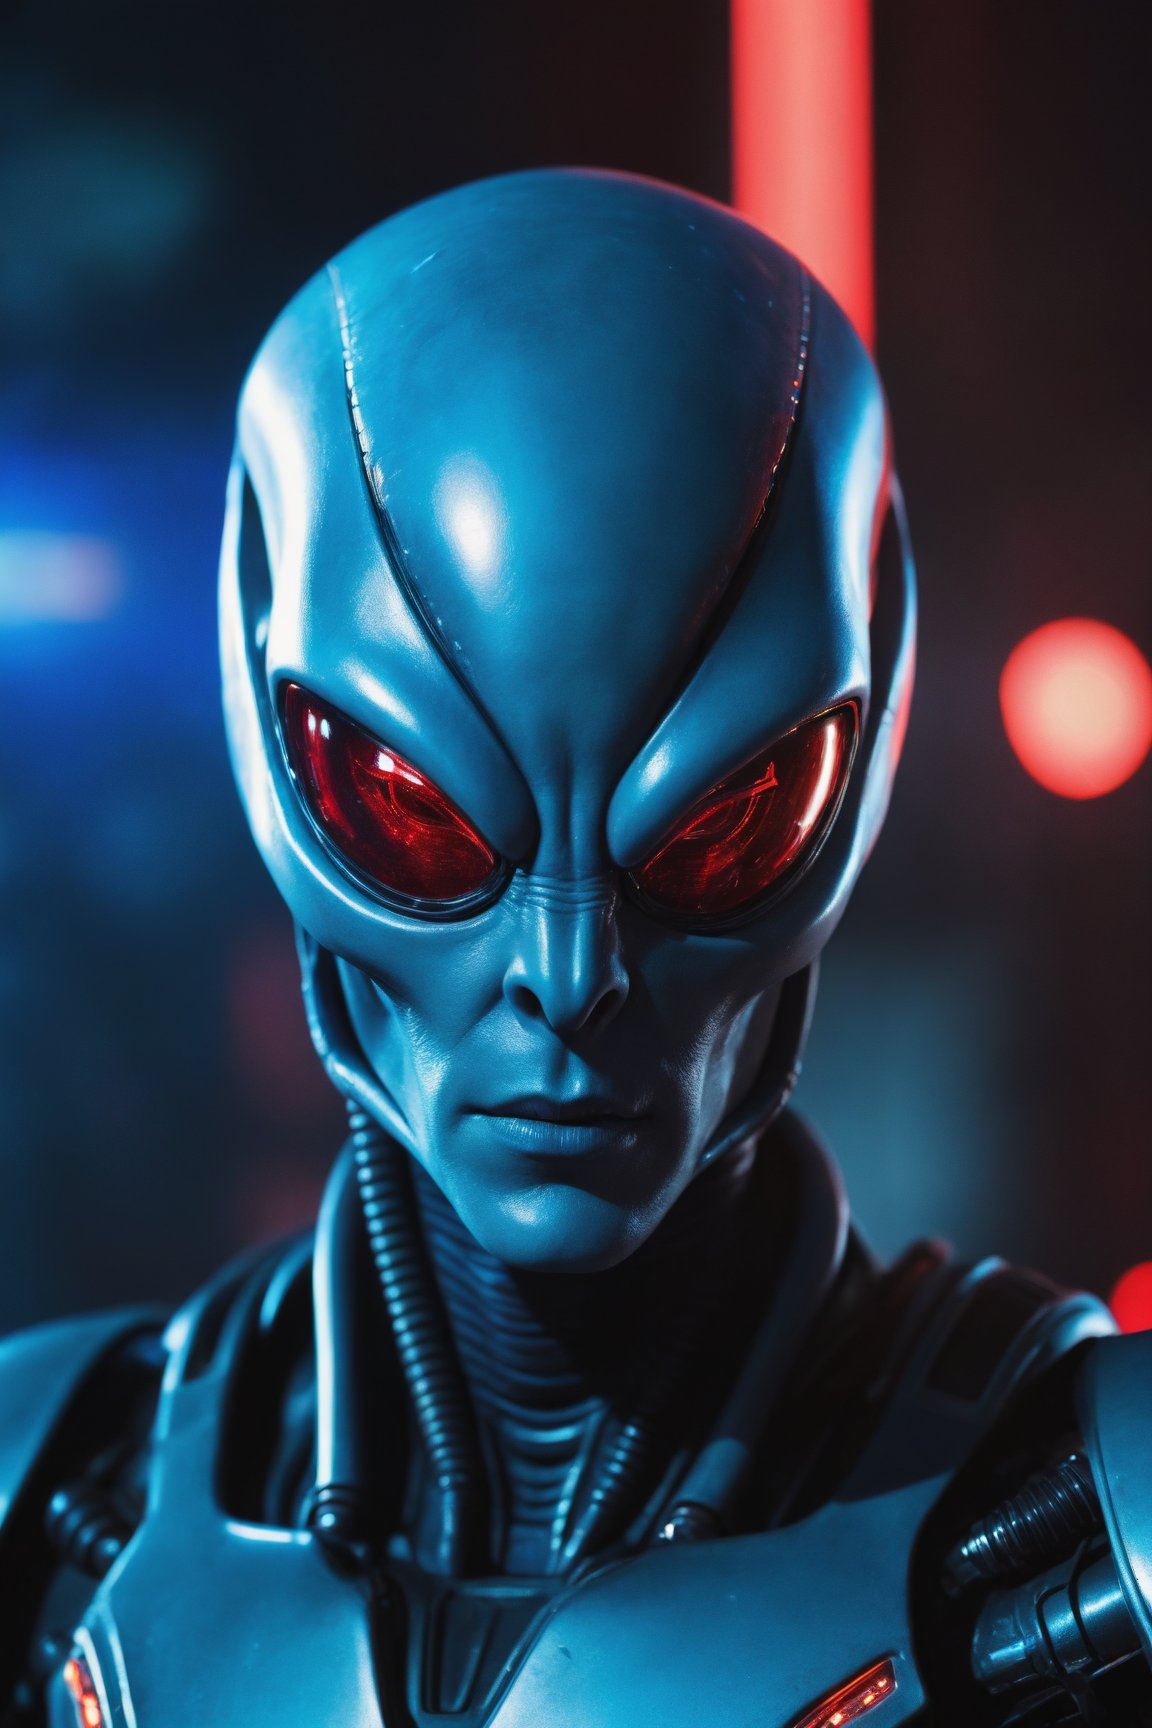 A cinematic still of an alien being with cybernetic eyes, in a scifi style, with detailed skin texture and light reflections on the eye makeup. Blue lighting is in his left eye and red glowing lights are around it. The background is blurred to focus attention on him, holding what appears to be a laser gun or weapon. He has silver metallic armorlike and there are some mechanical parts attached from where he was modified